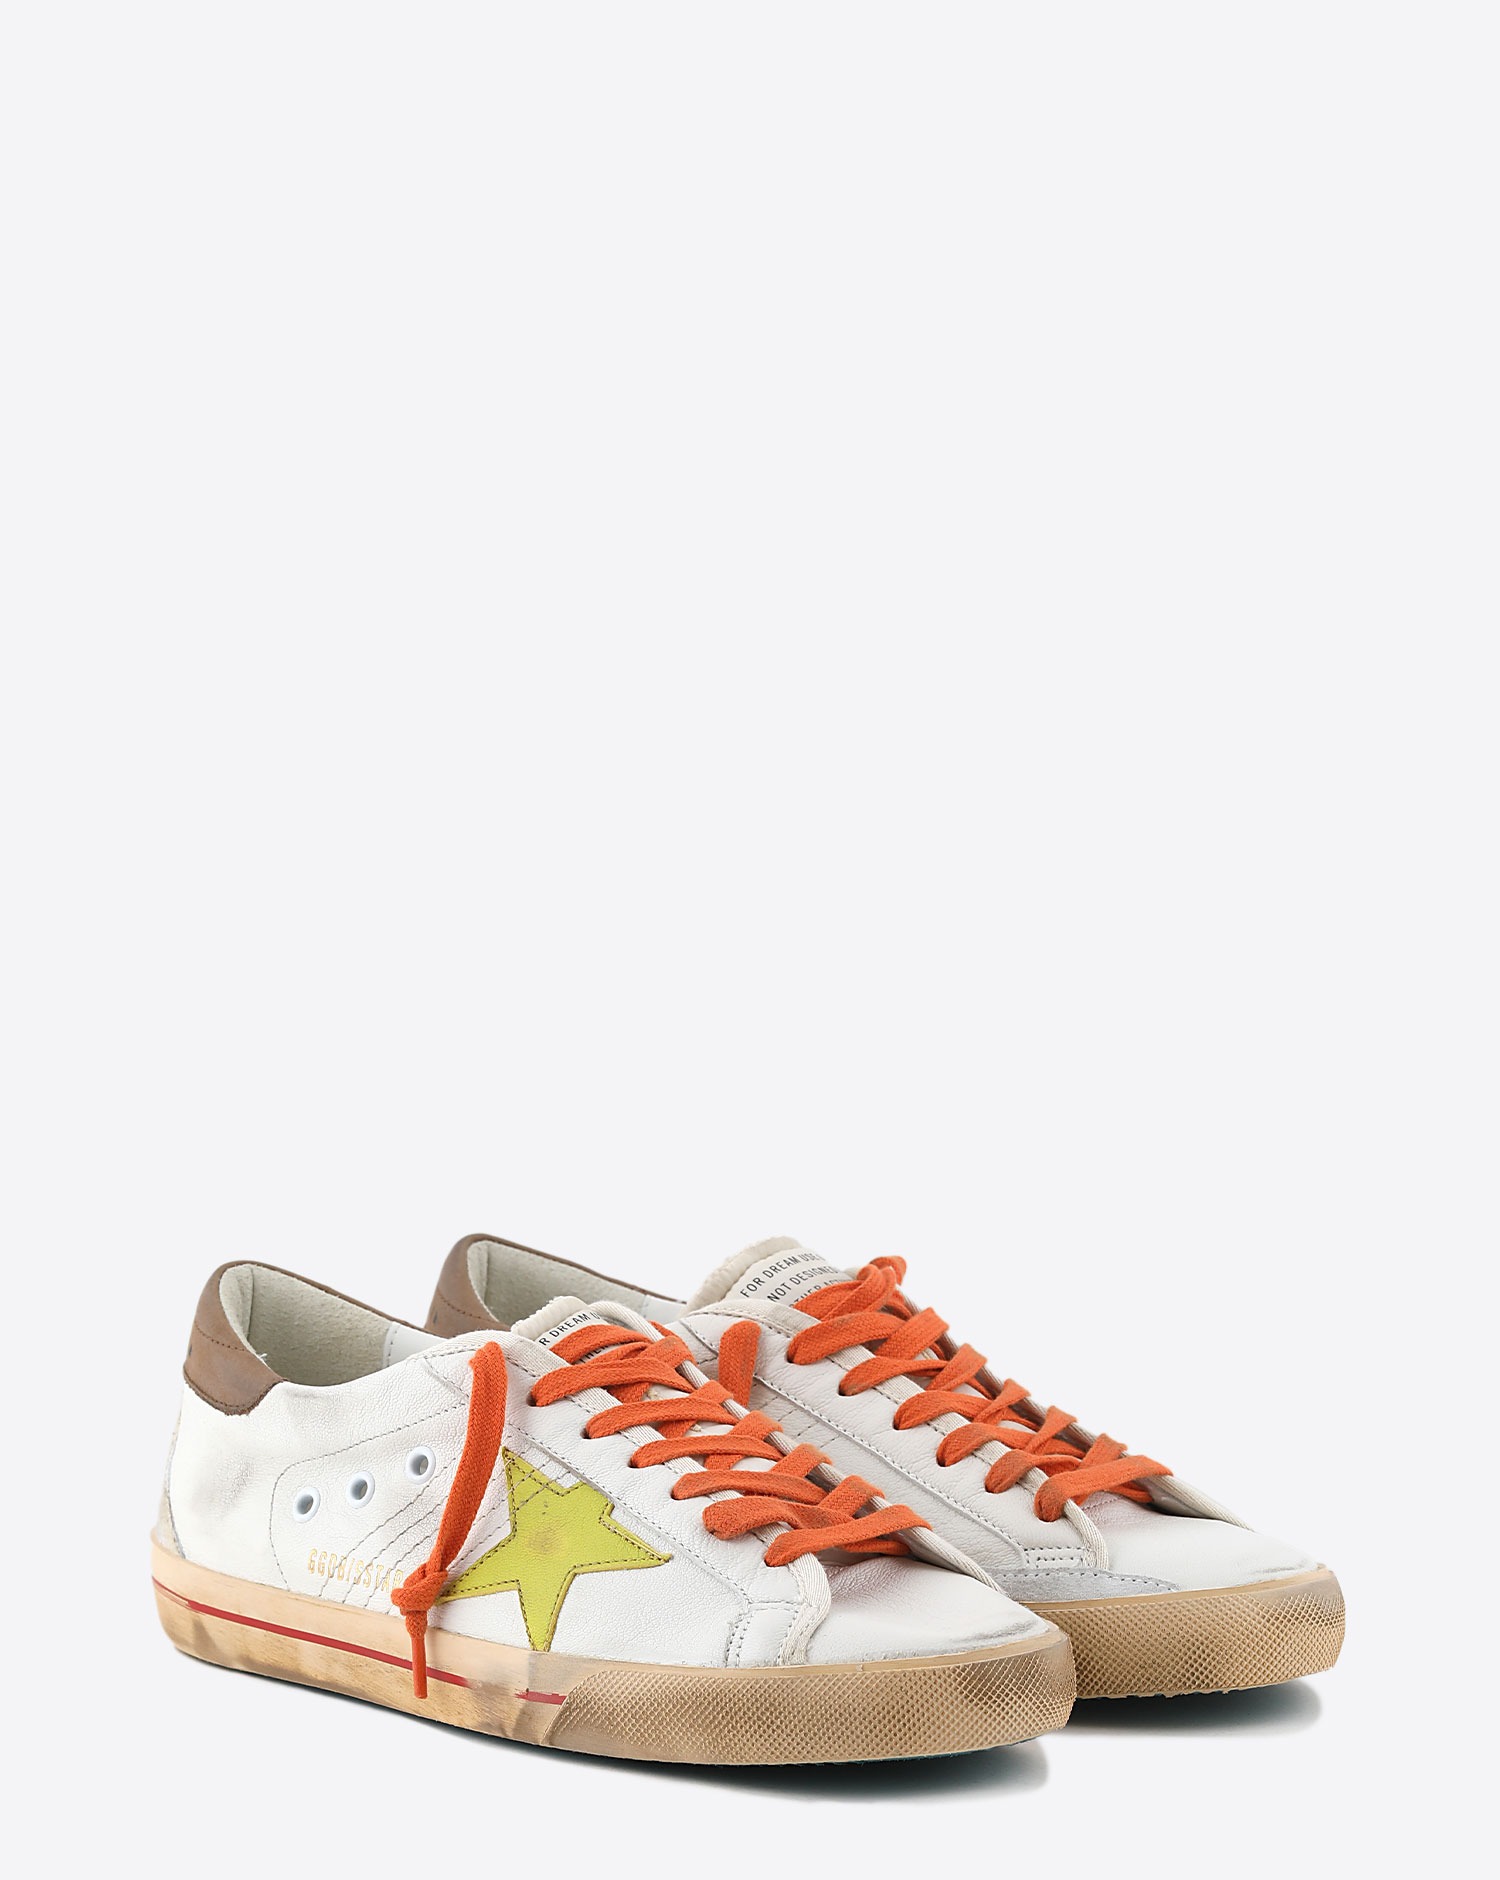 Golden Goose Homme Super-Star White Citronelle Taupe 11384 sneakers 